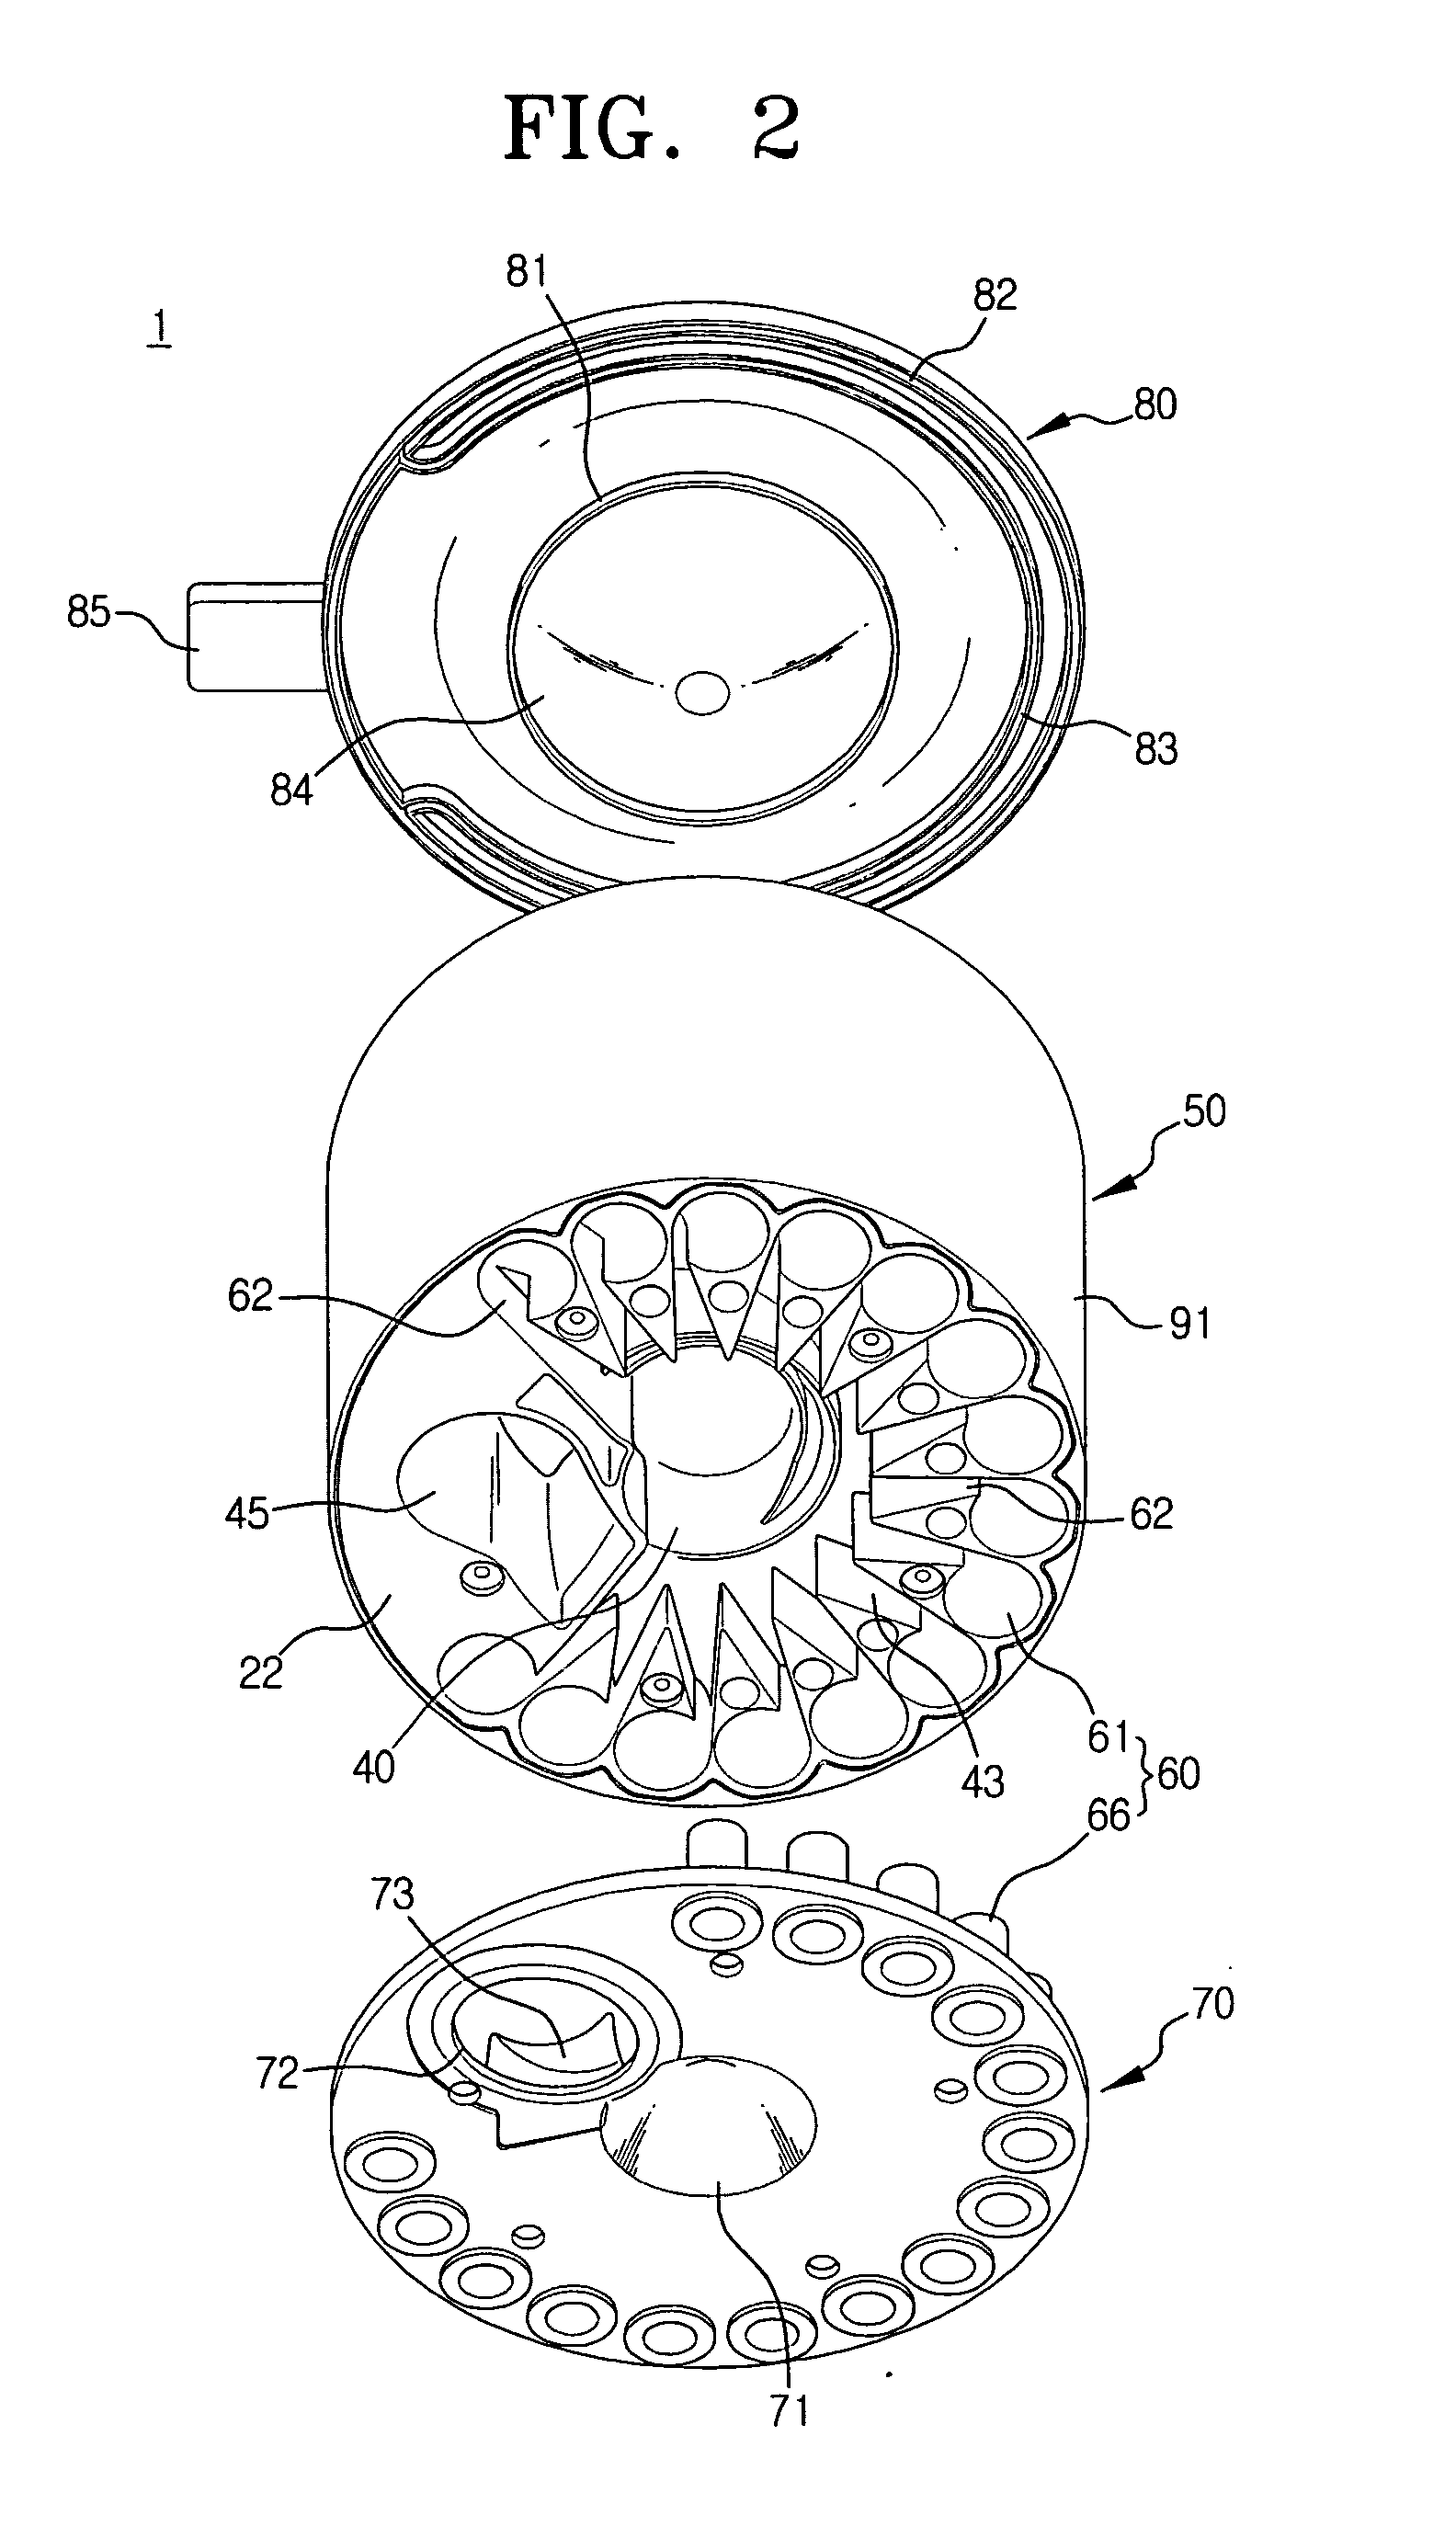 Multi-cyclone dust collector for vacuum cleaner and dust collecting method